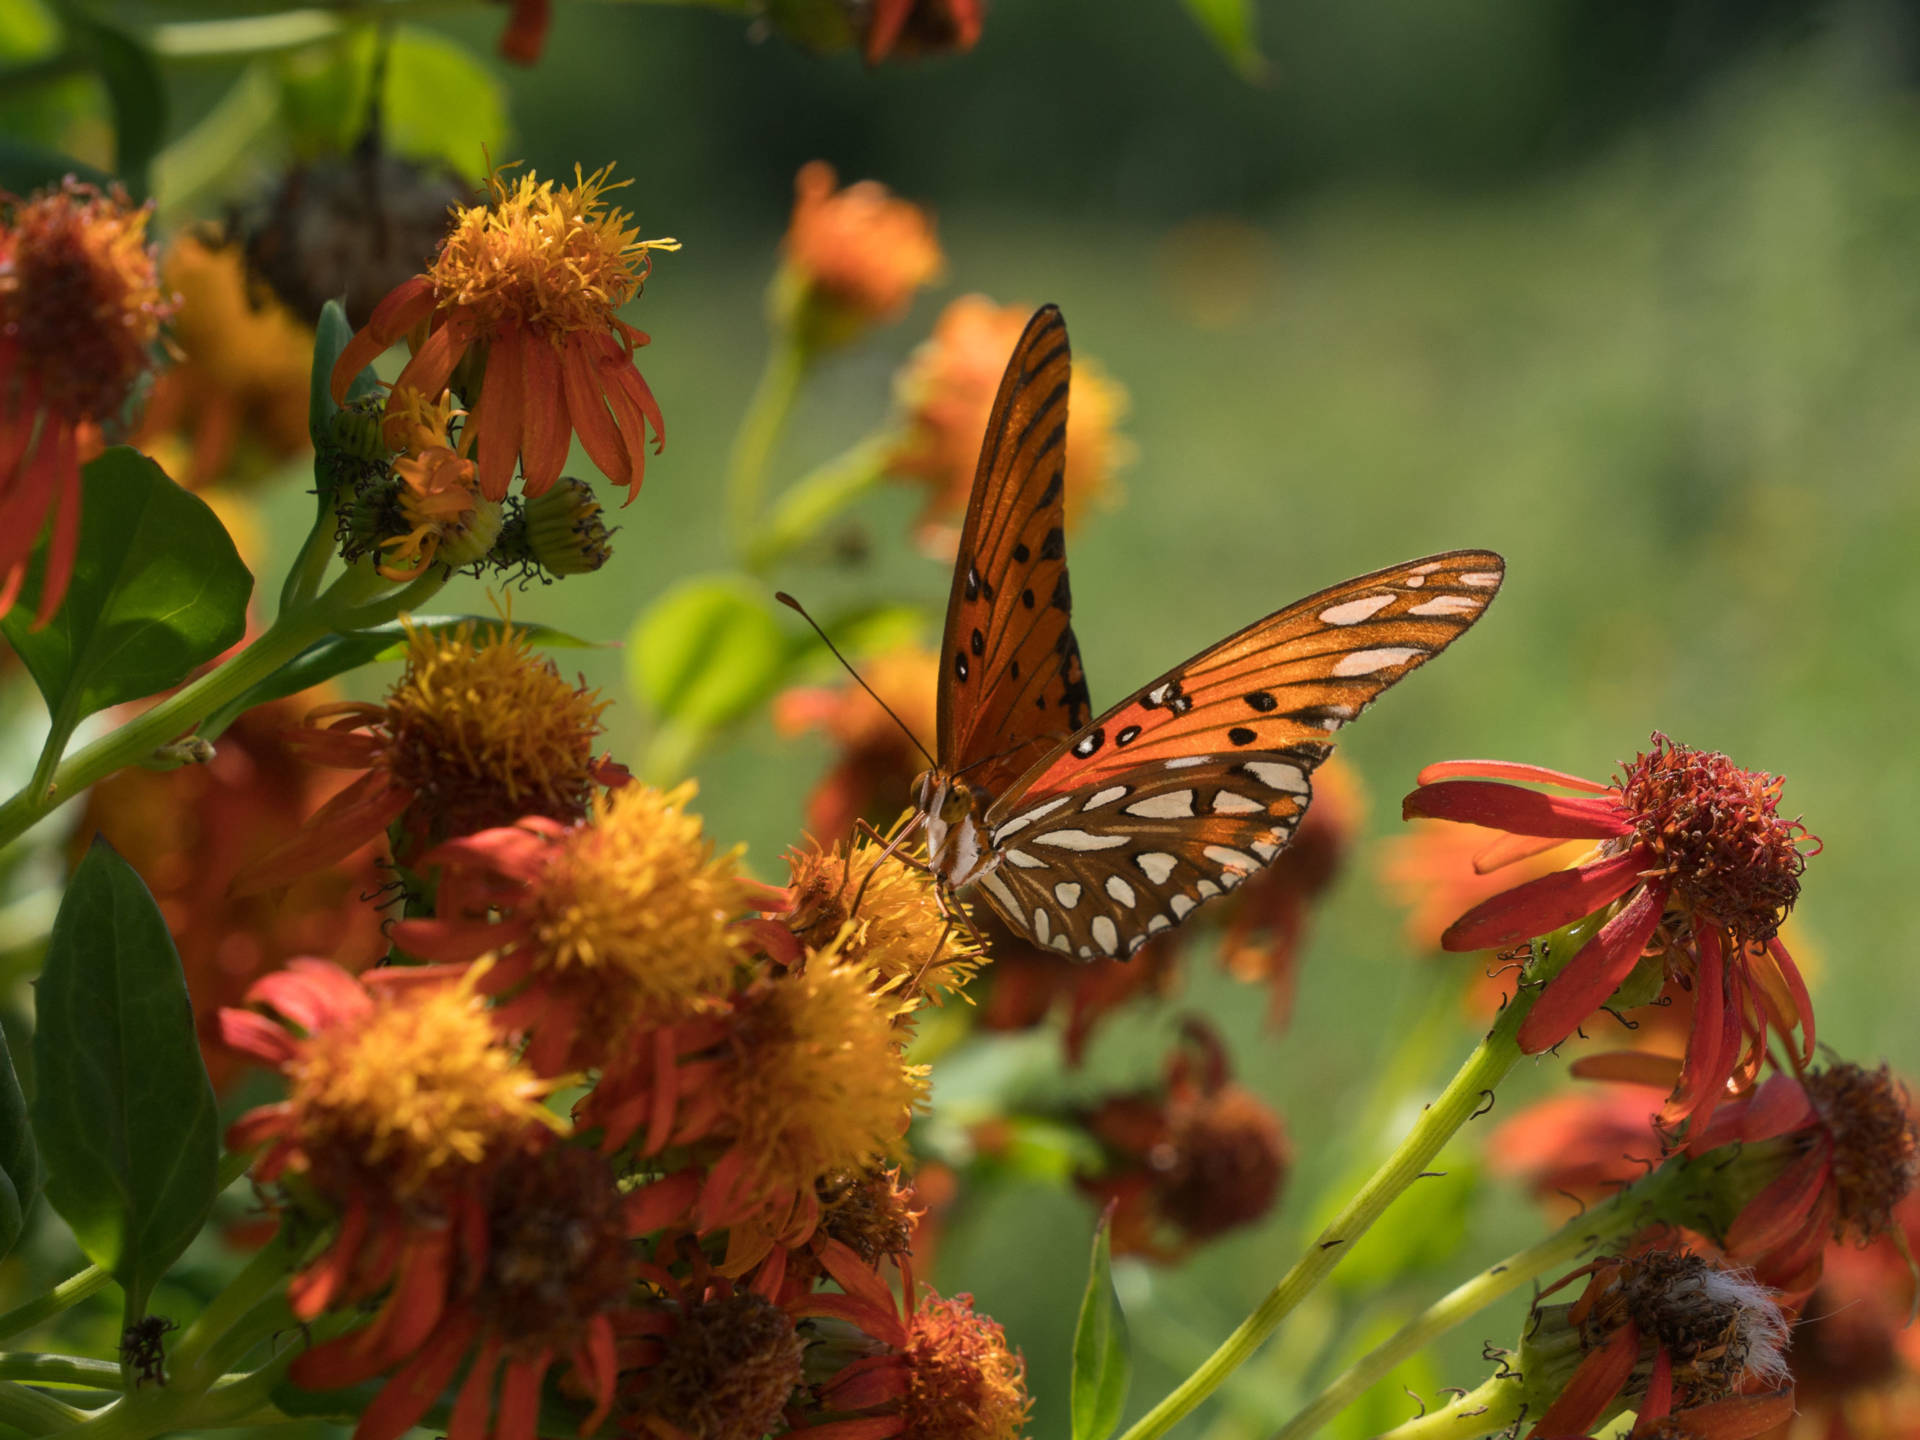 A Gulf fritillary butterfly perches on a flower at the National Butterfly Center, which is home to several endangered plants and threatened animals. The center is asking a federal judge to block government officials from building a border wall on its property. Claire Harbage/NPR